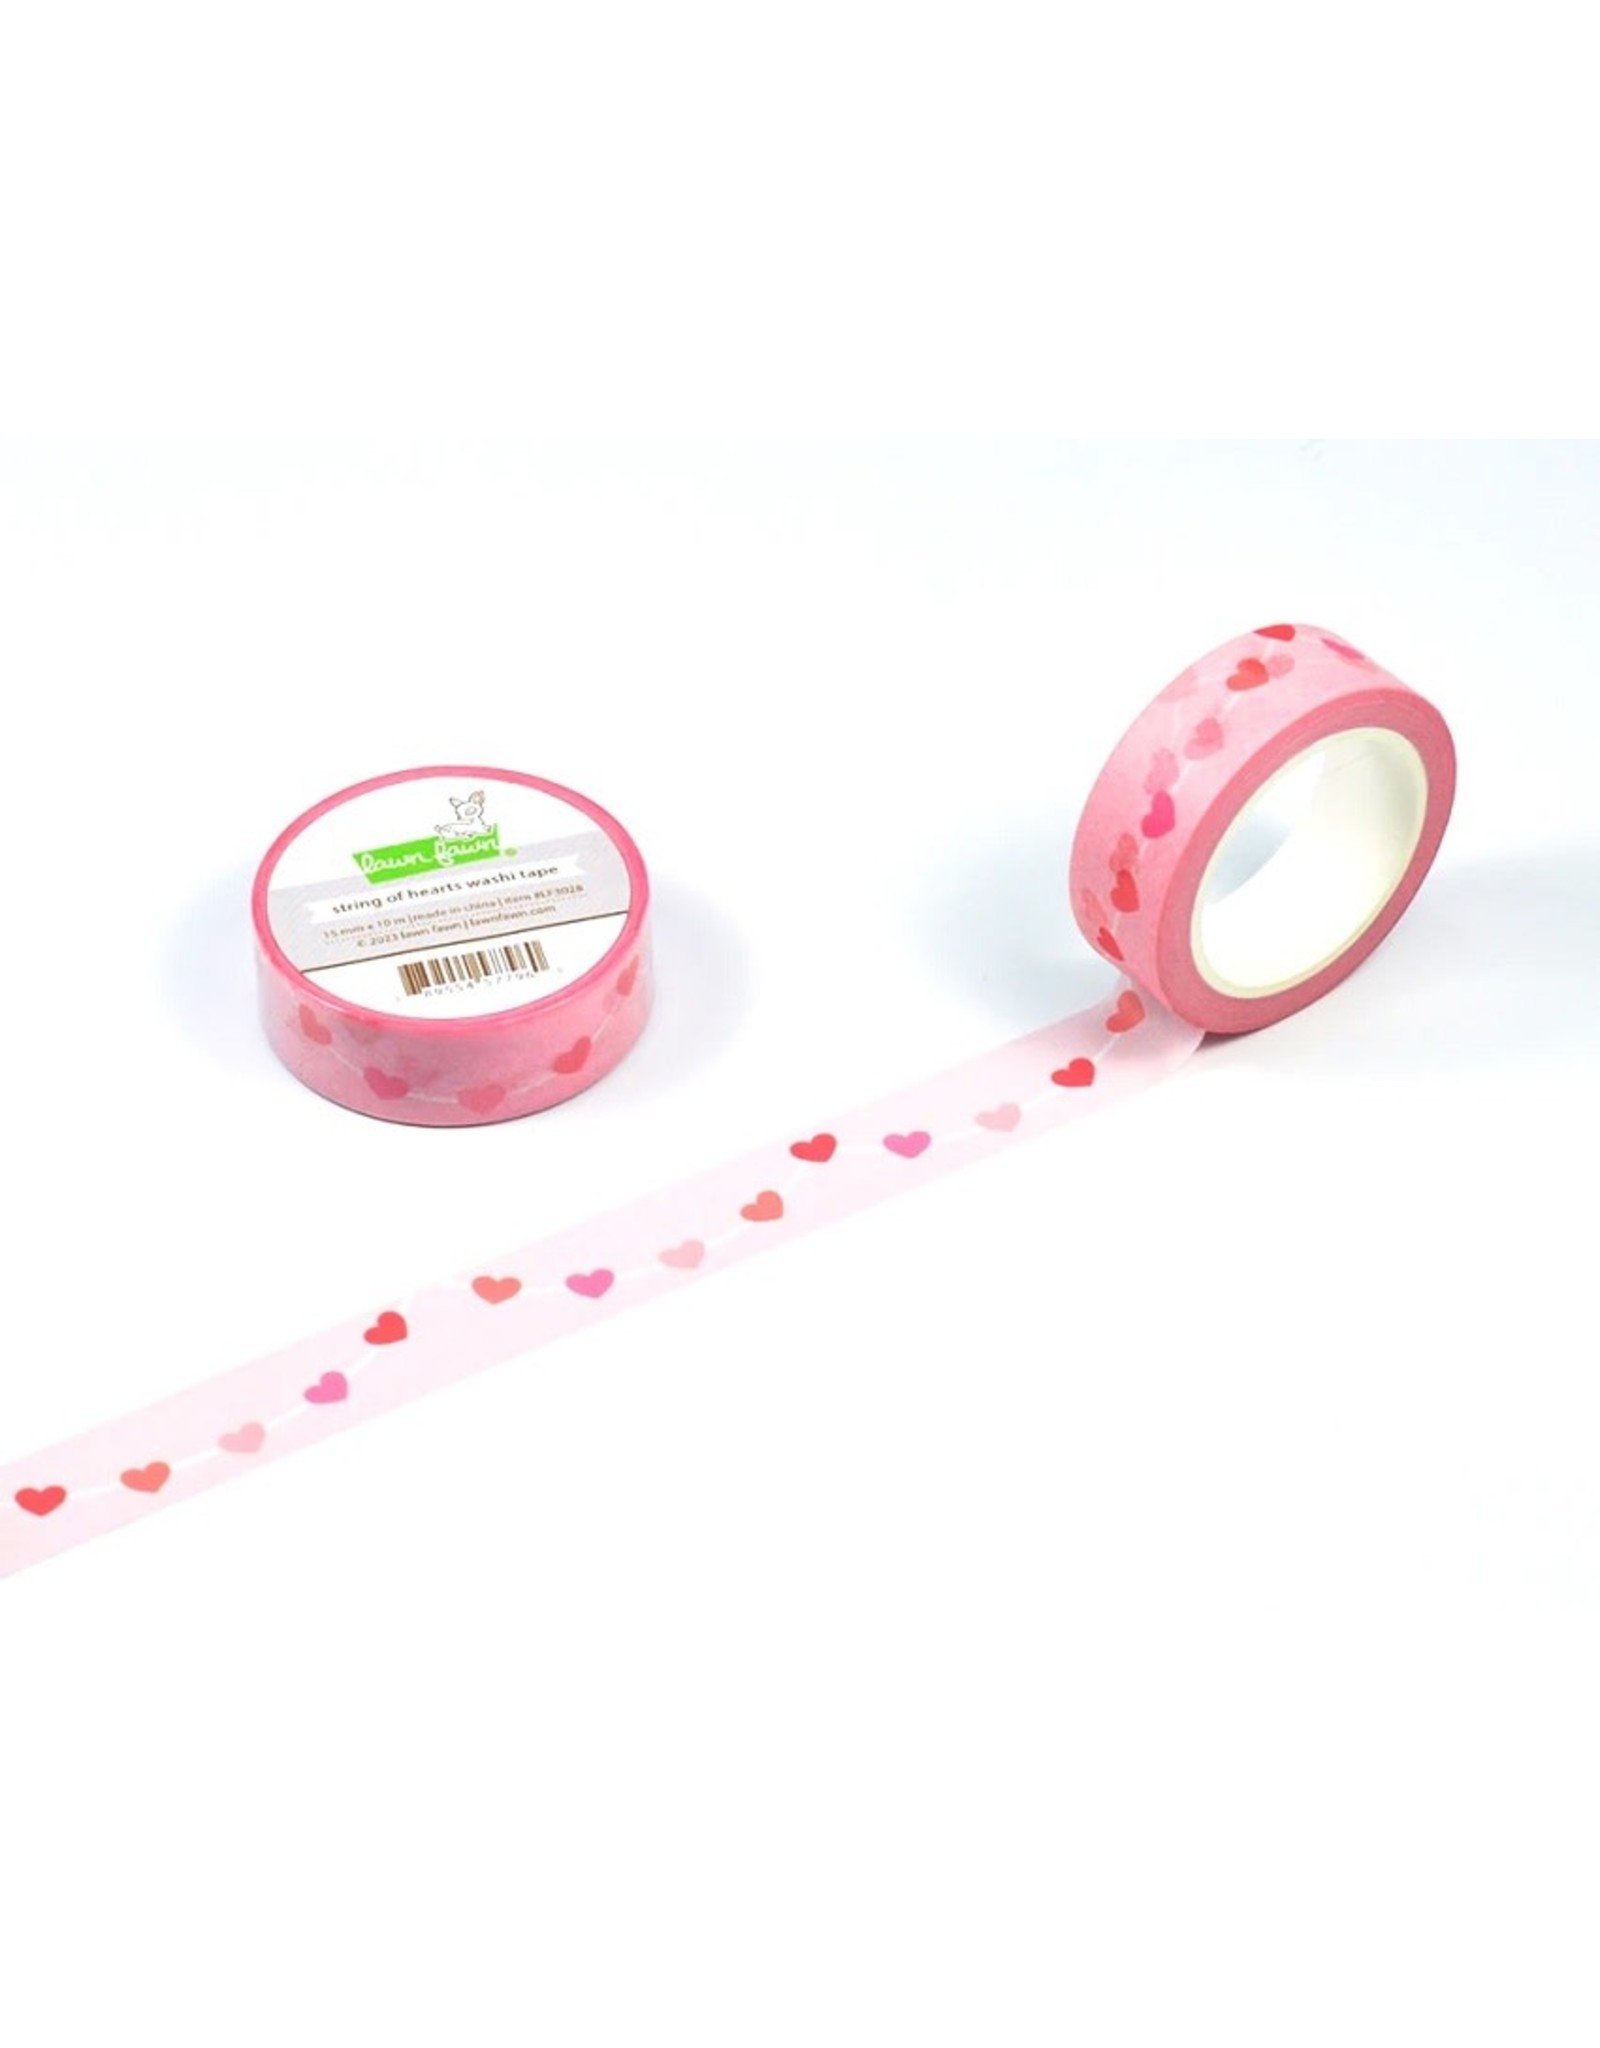 Lawn Fawn String of Hearts - Washi Tape